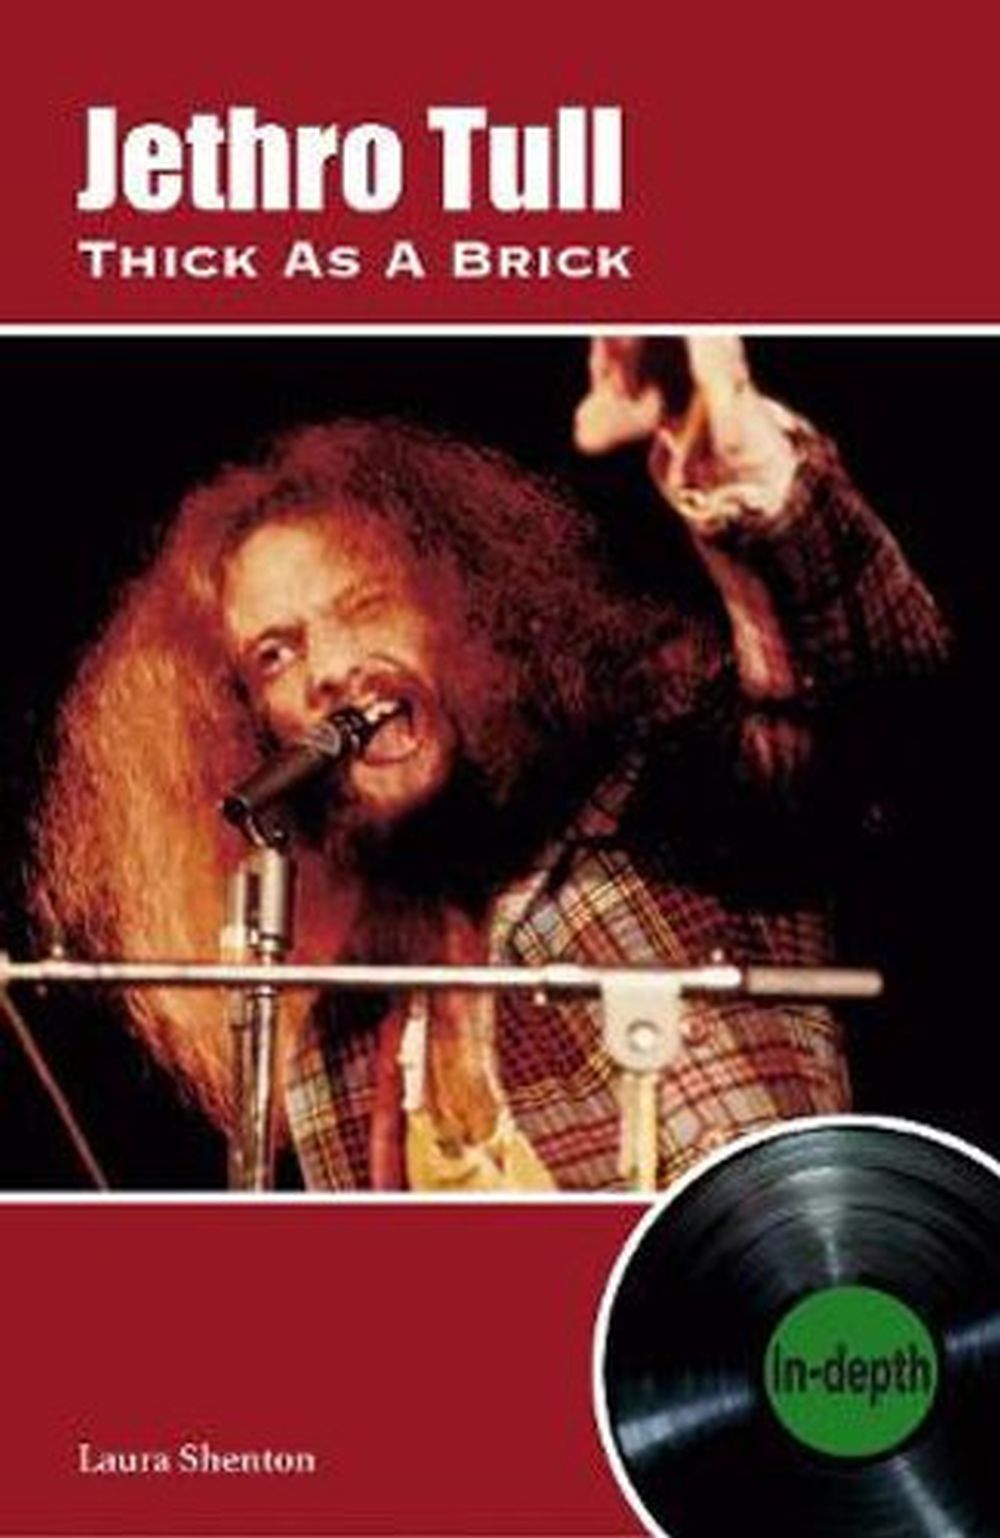 Jethro Tull - Shenton, Laura - Thick As A Brick (In-Depth Series) - Book - New